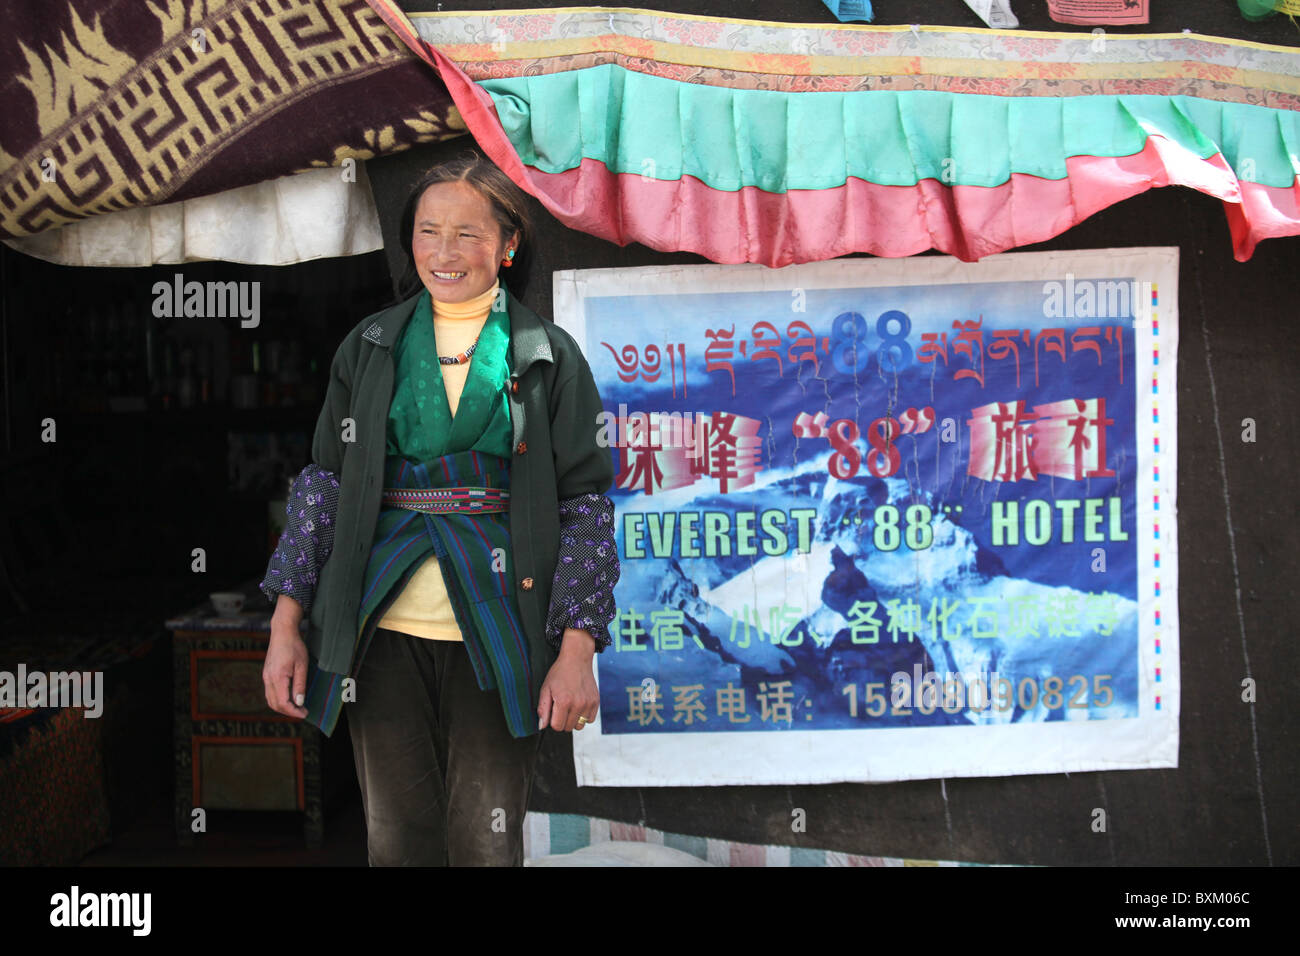 The owner of a yak hair tent or hotel at Everest base camp in Tibet, China. Stock Photo